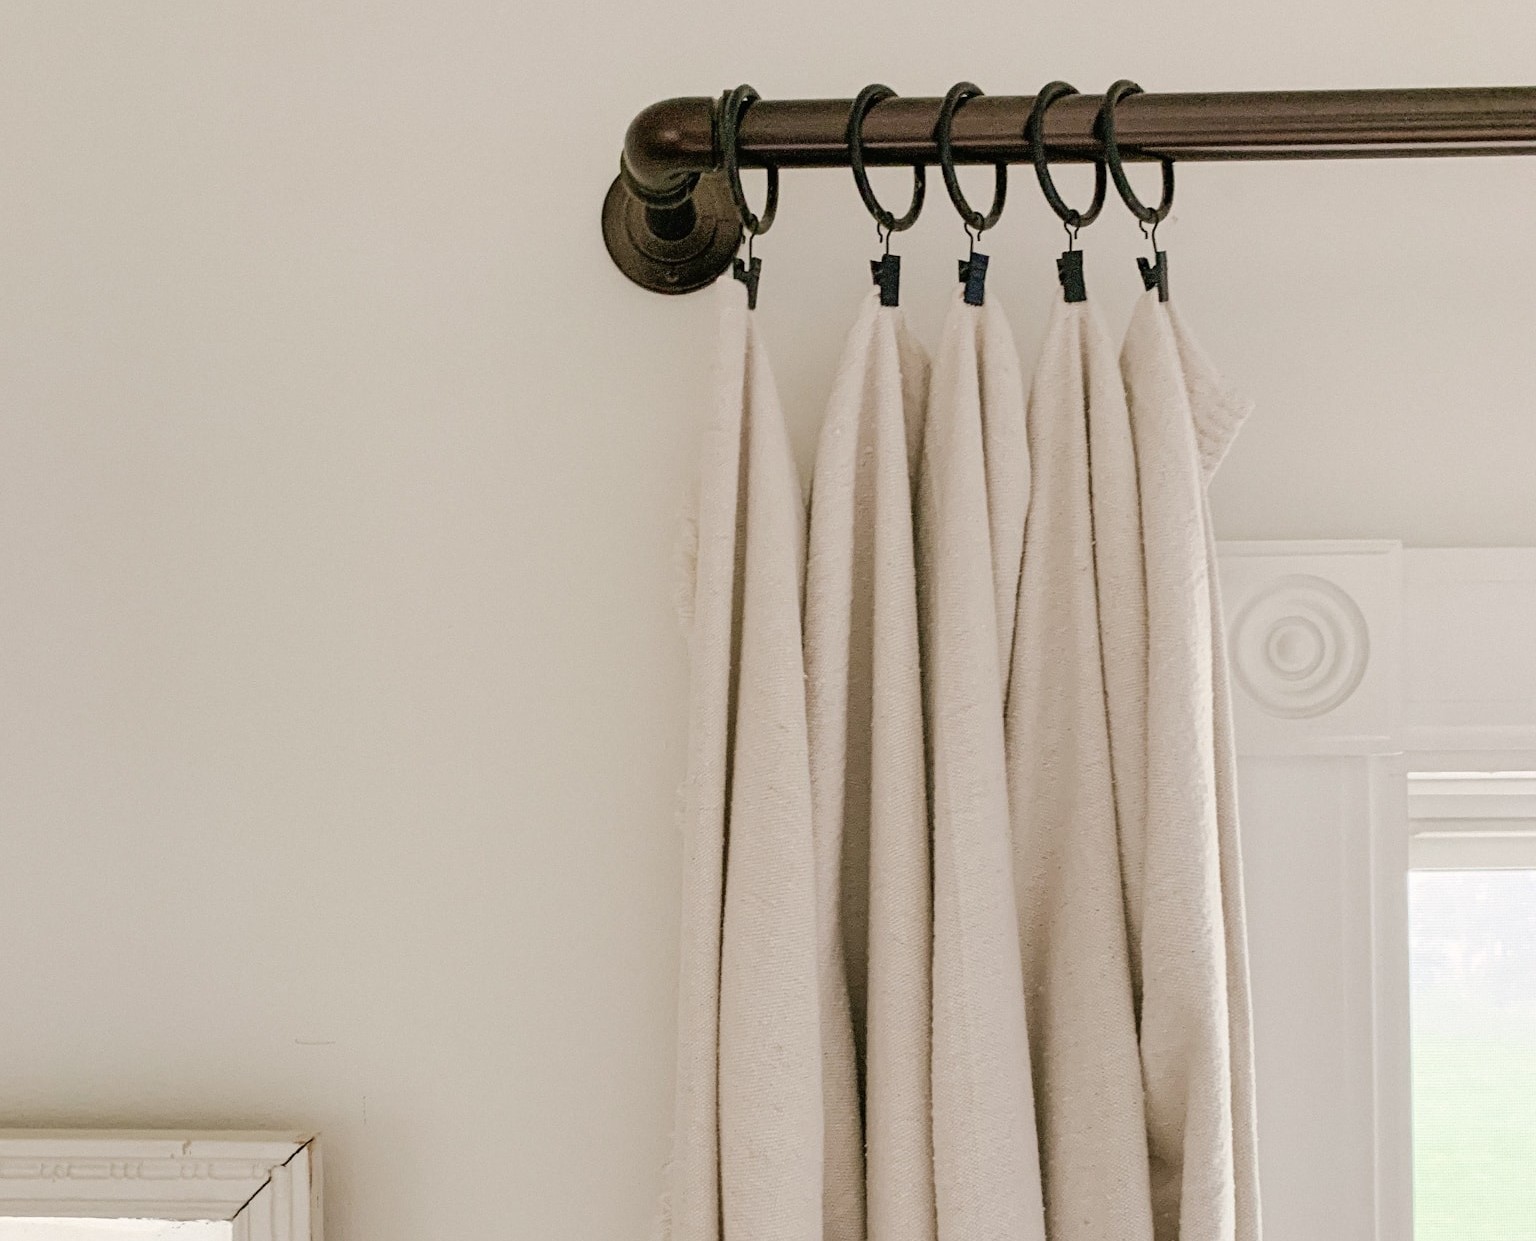 How To Make Curtains Out Of Drop Cloths